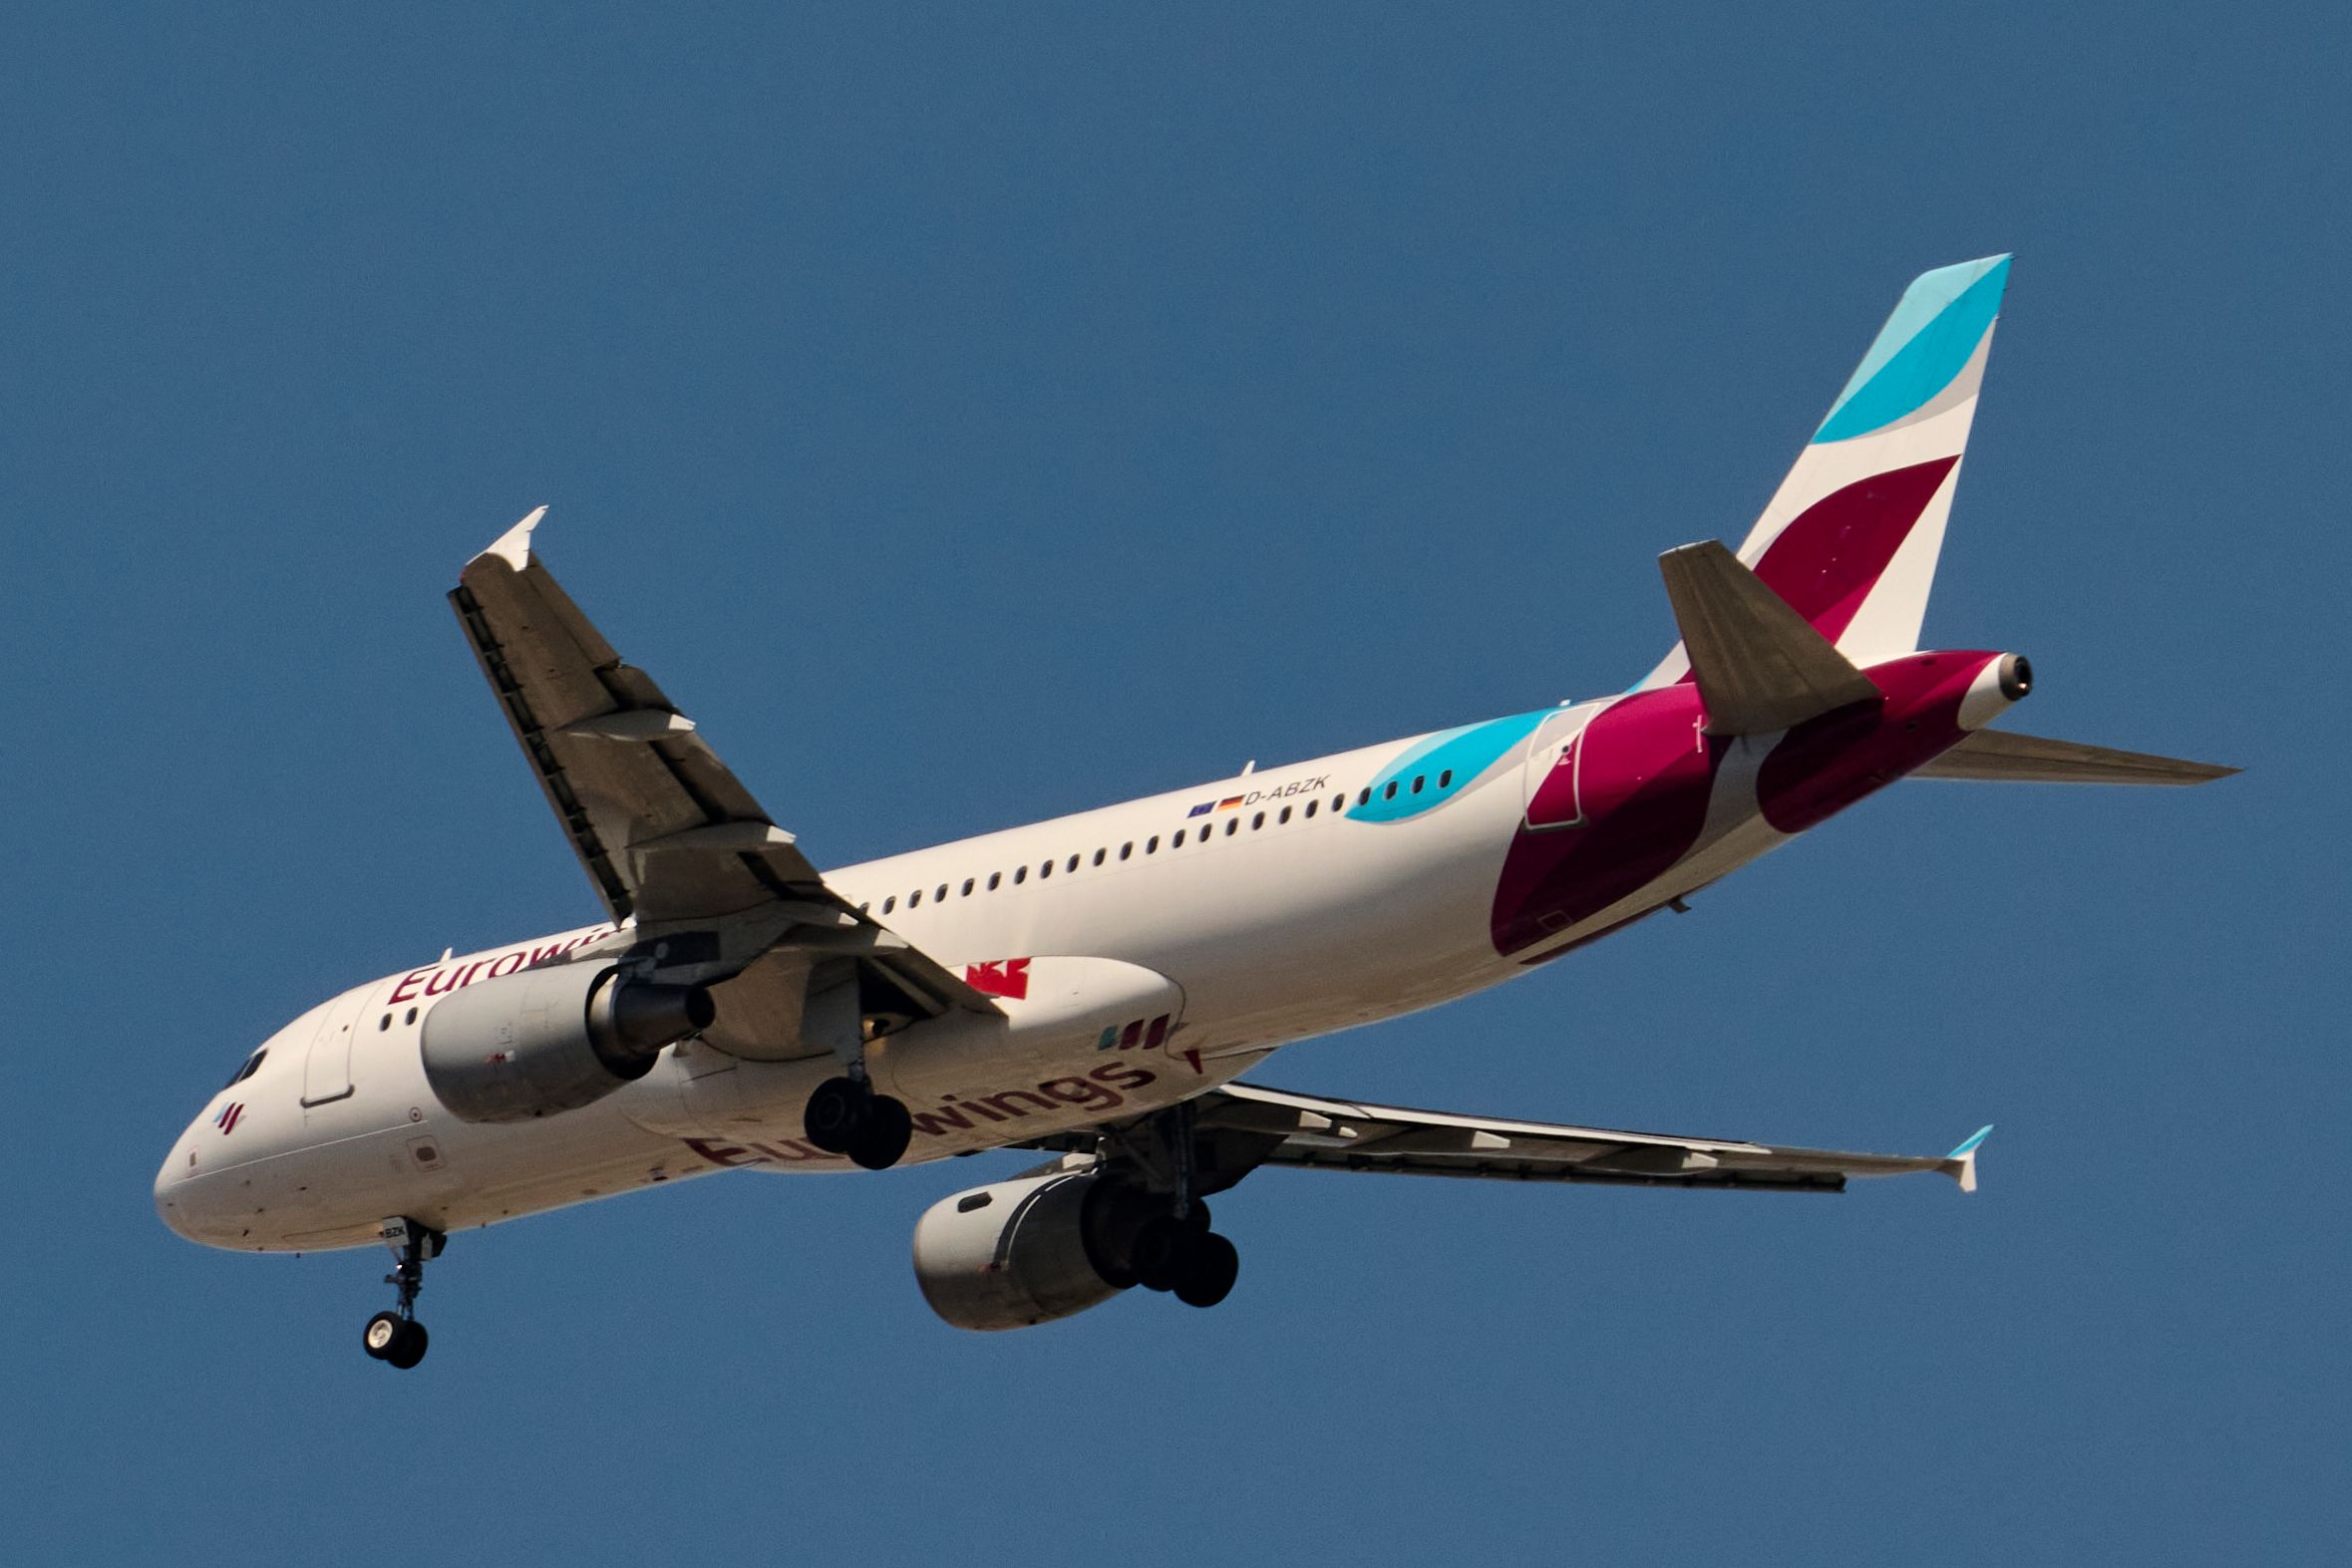 Eurowings Airbus A320-216 overhead